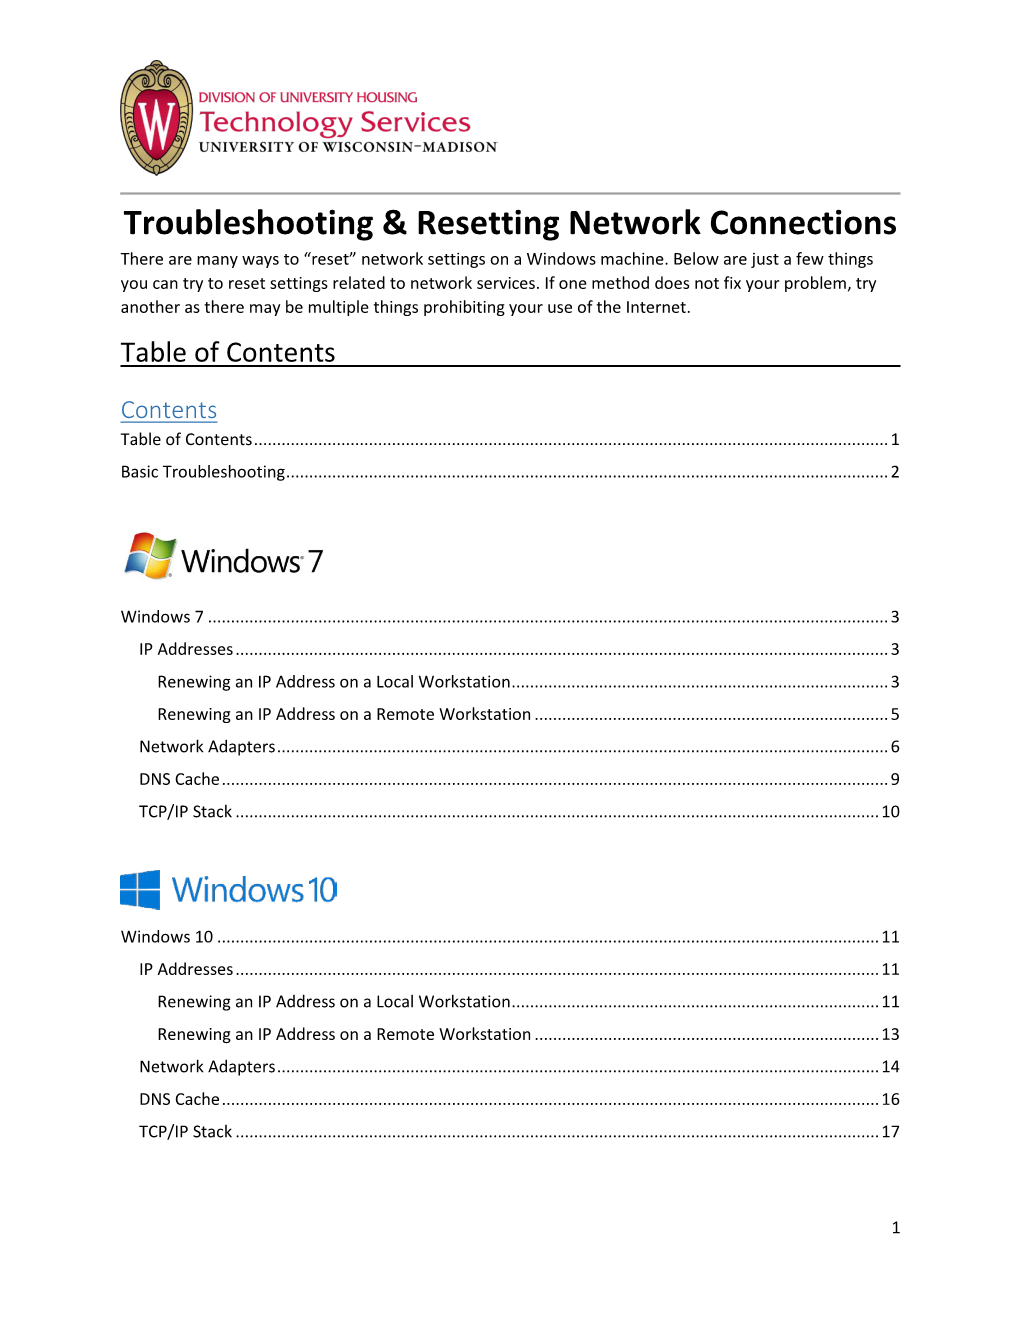 Troubleshooting & Resetting Network Connections